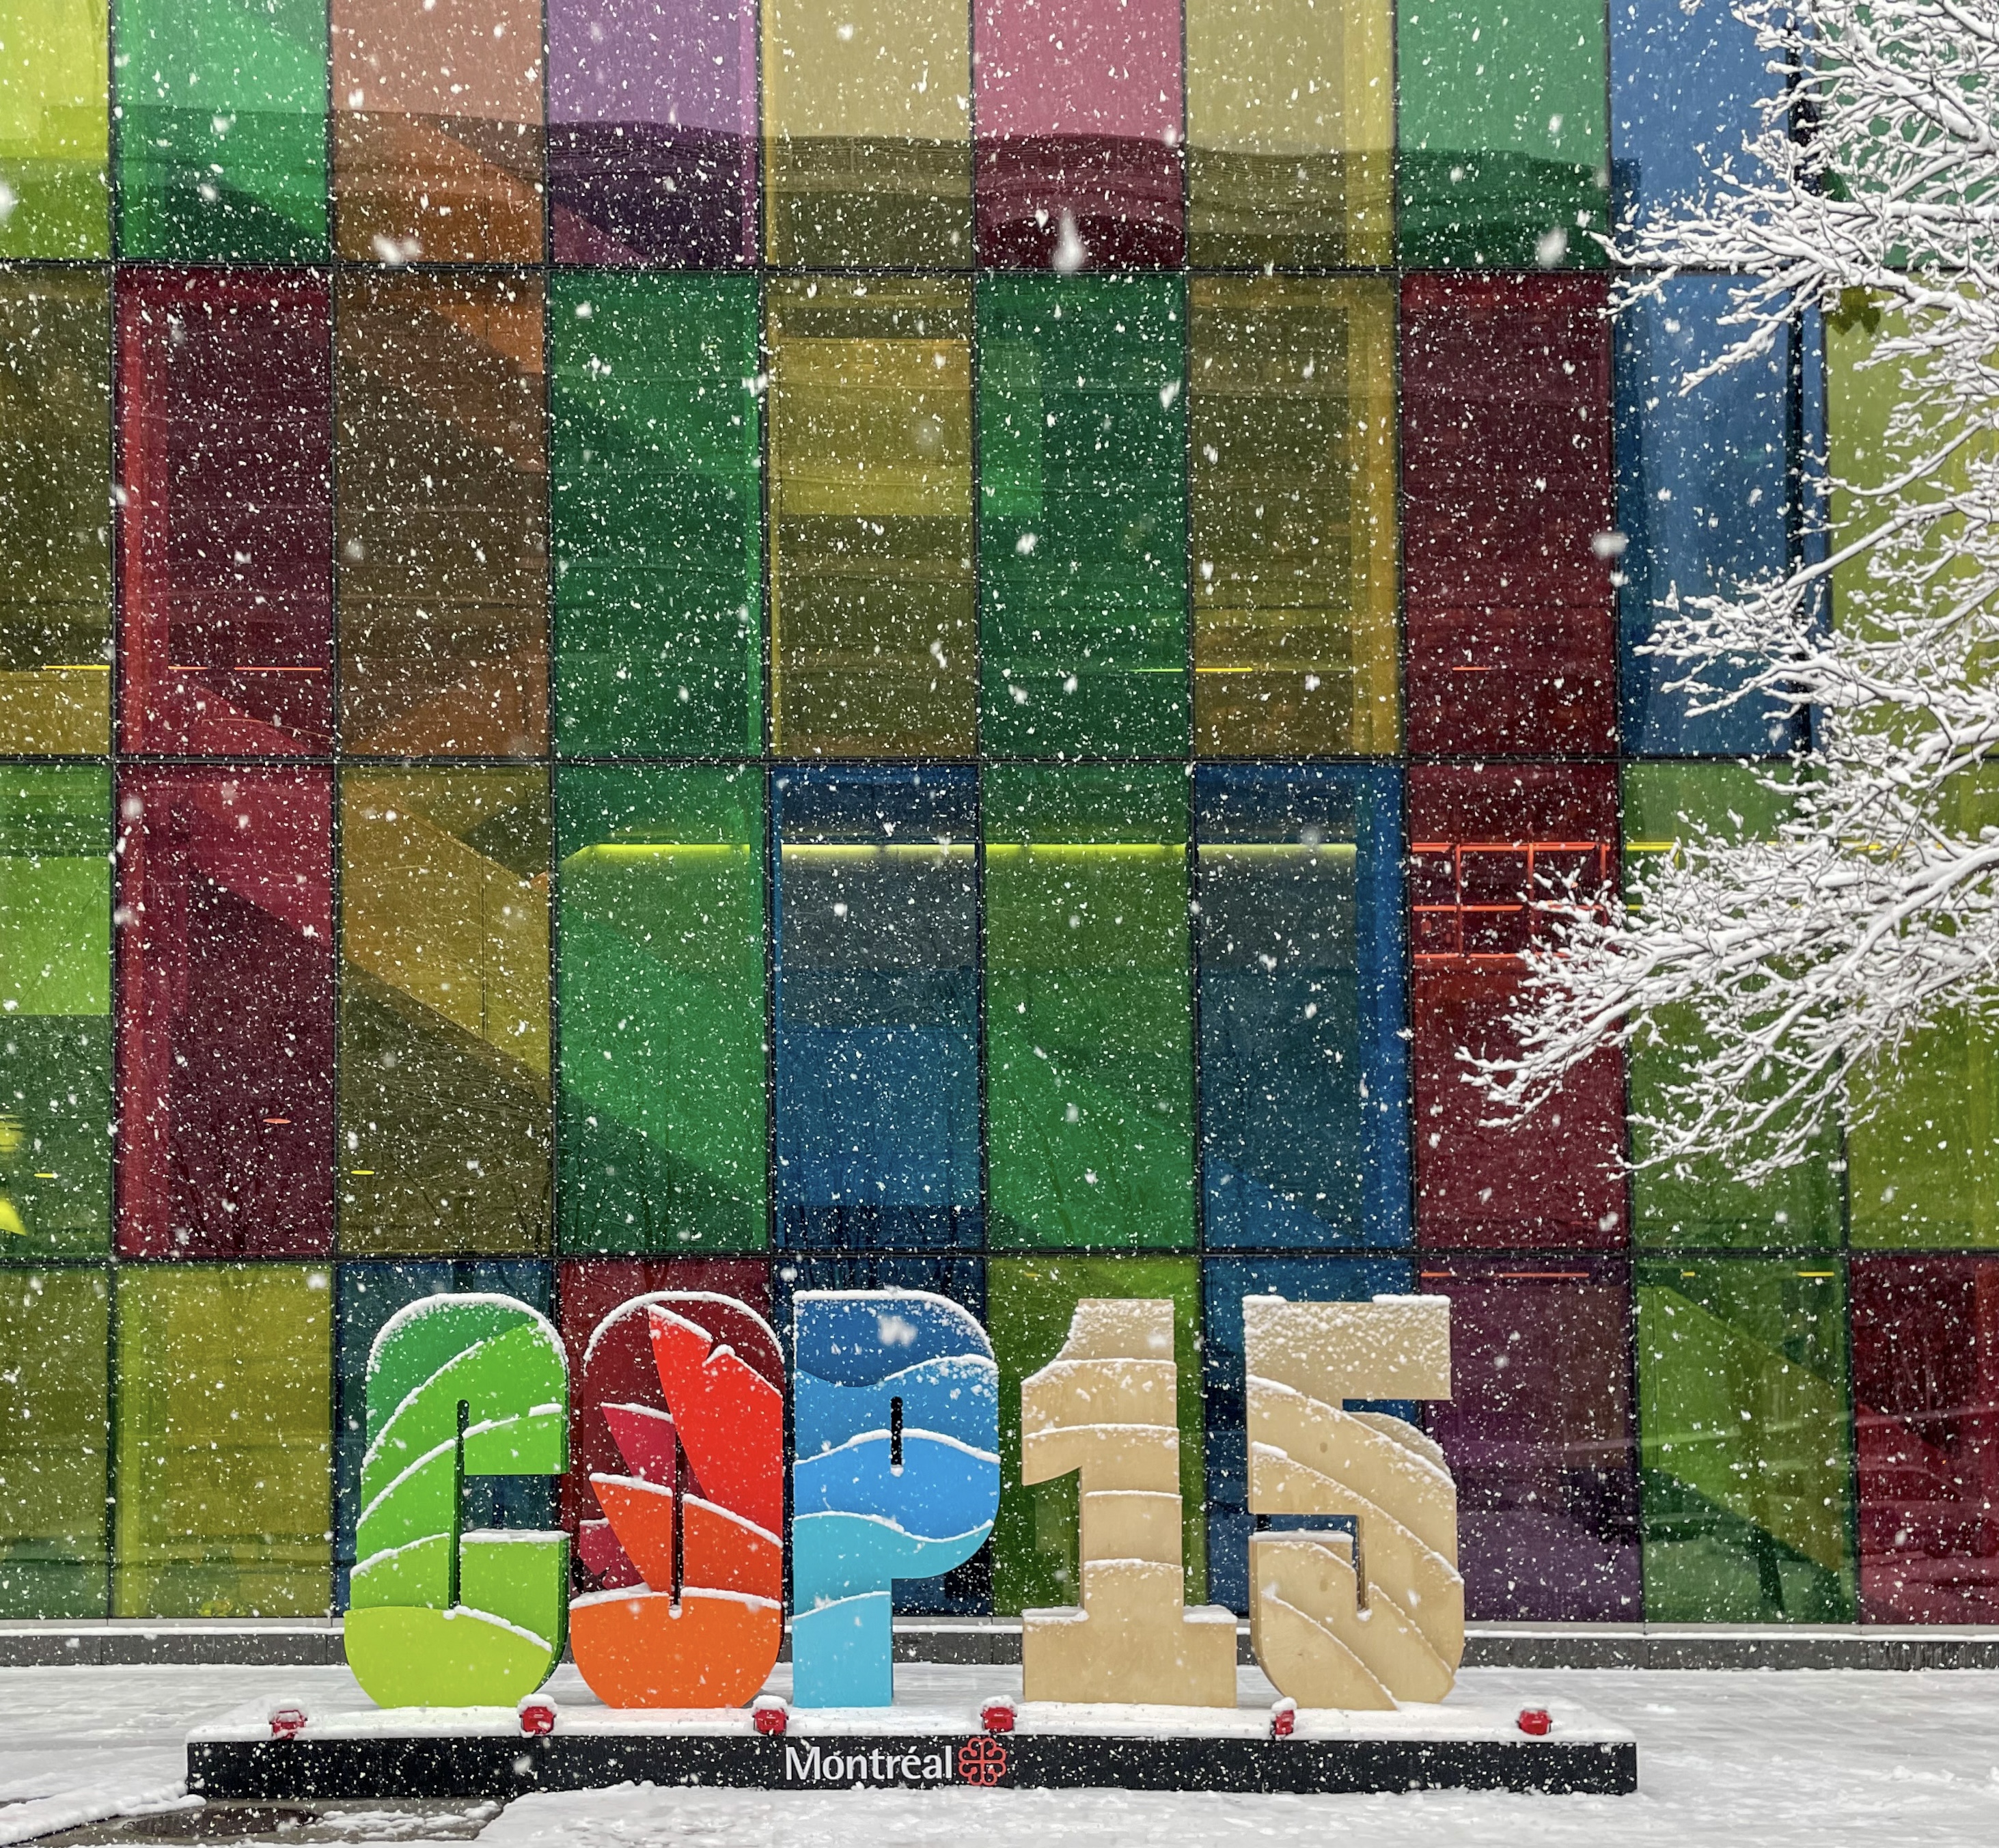 Outside the Le Palais des Congrès in Montréal. There is a sign for COP15 with a colourful windows in the background and snow gently falling.